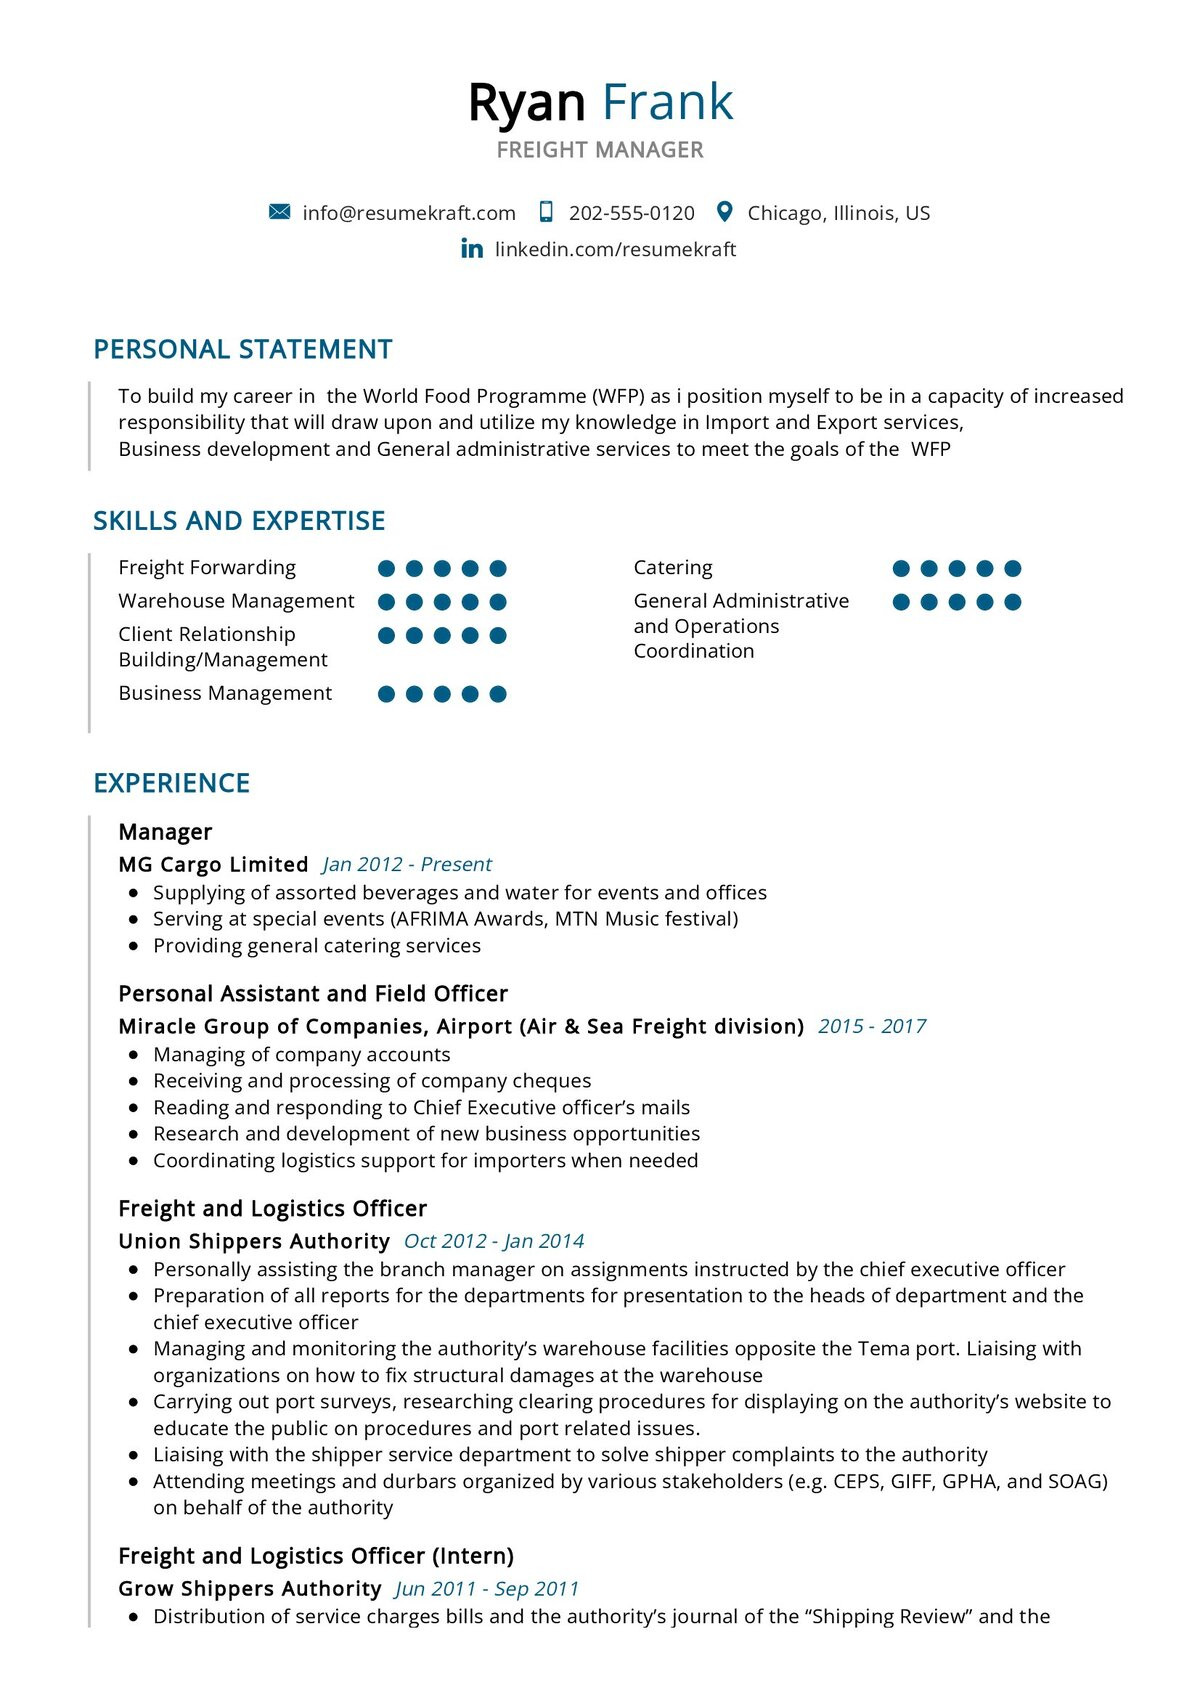 Resume Sample for Shipping and Receiving Manager Freight Manager Resume Example 2022 Writing Tips – Resumekraft